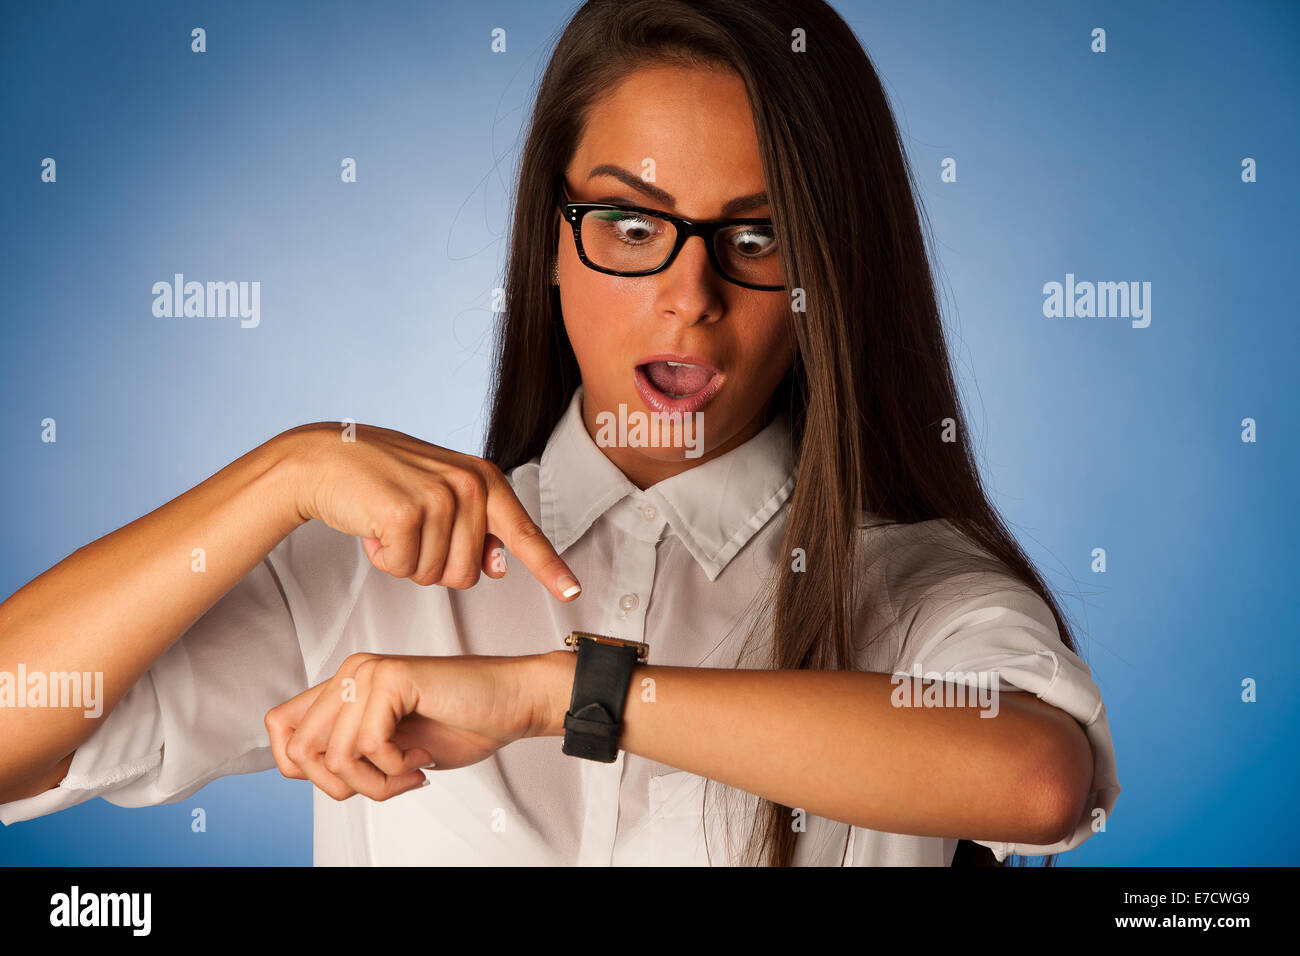 stressed woman staring into watch gesturing being late Stock Photo